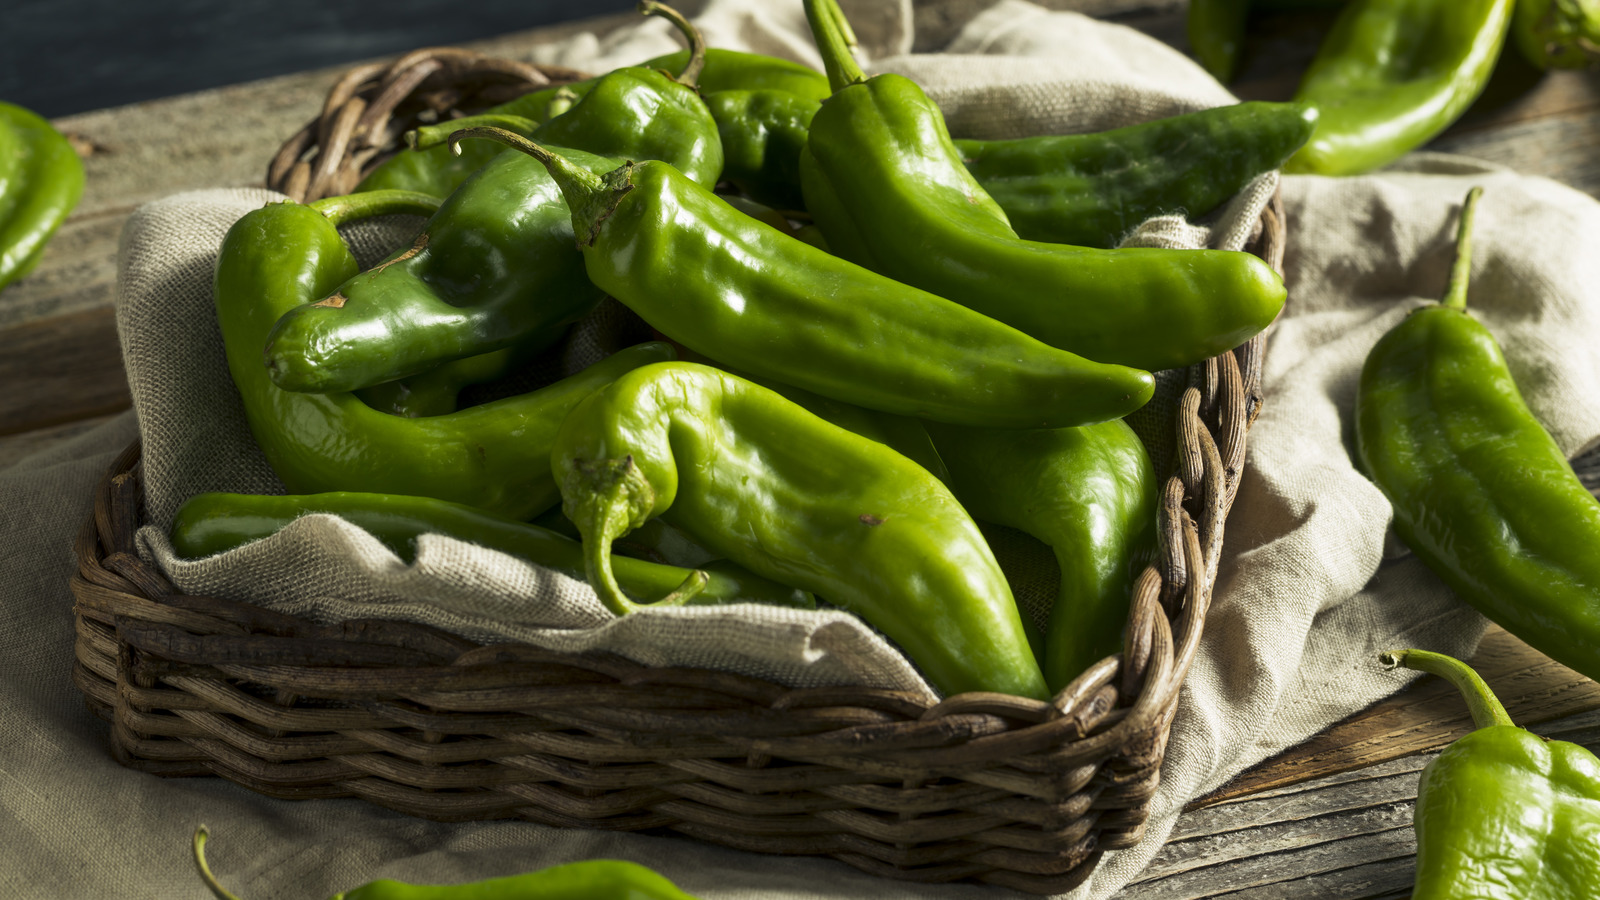 What Is A Hatch Chile And Is It Spicy?